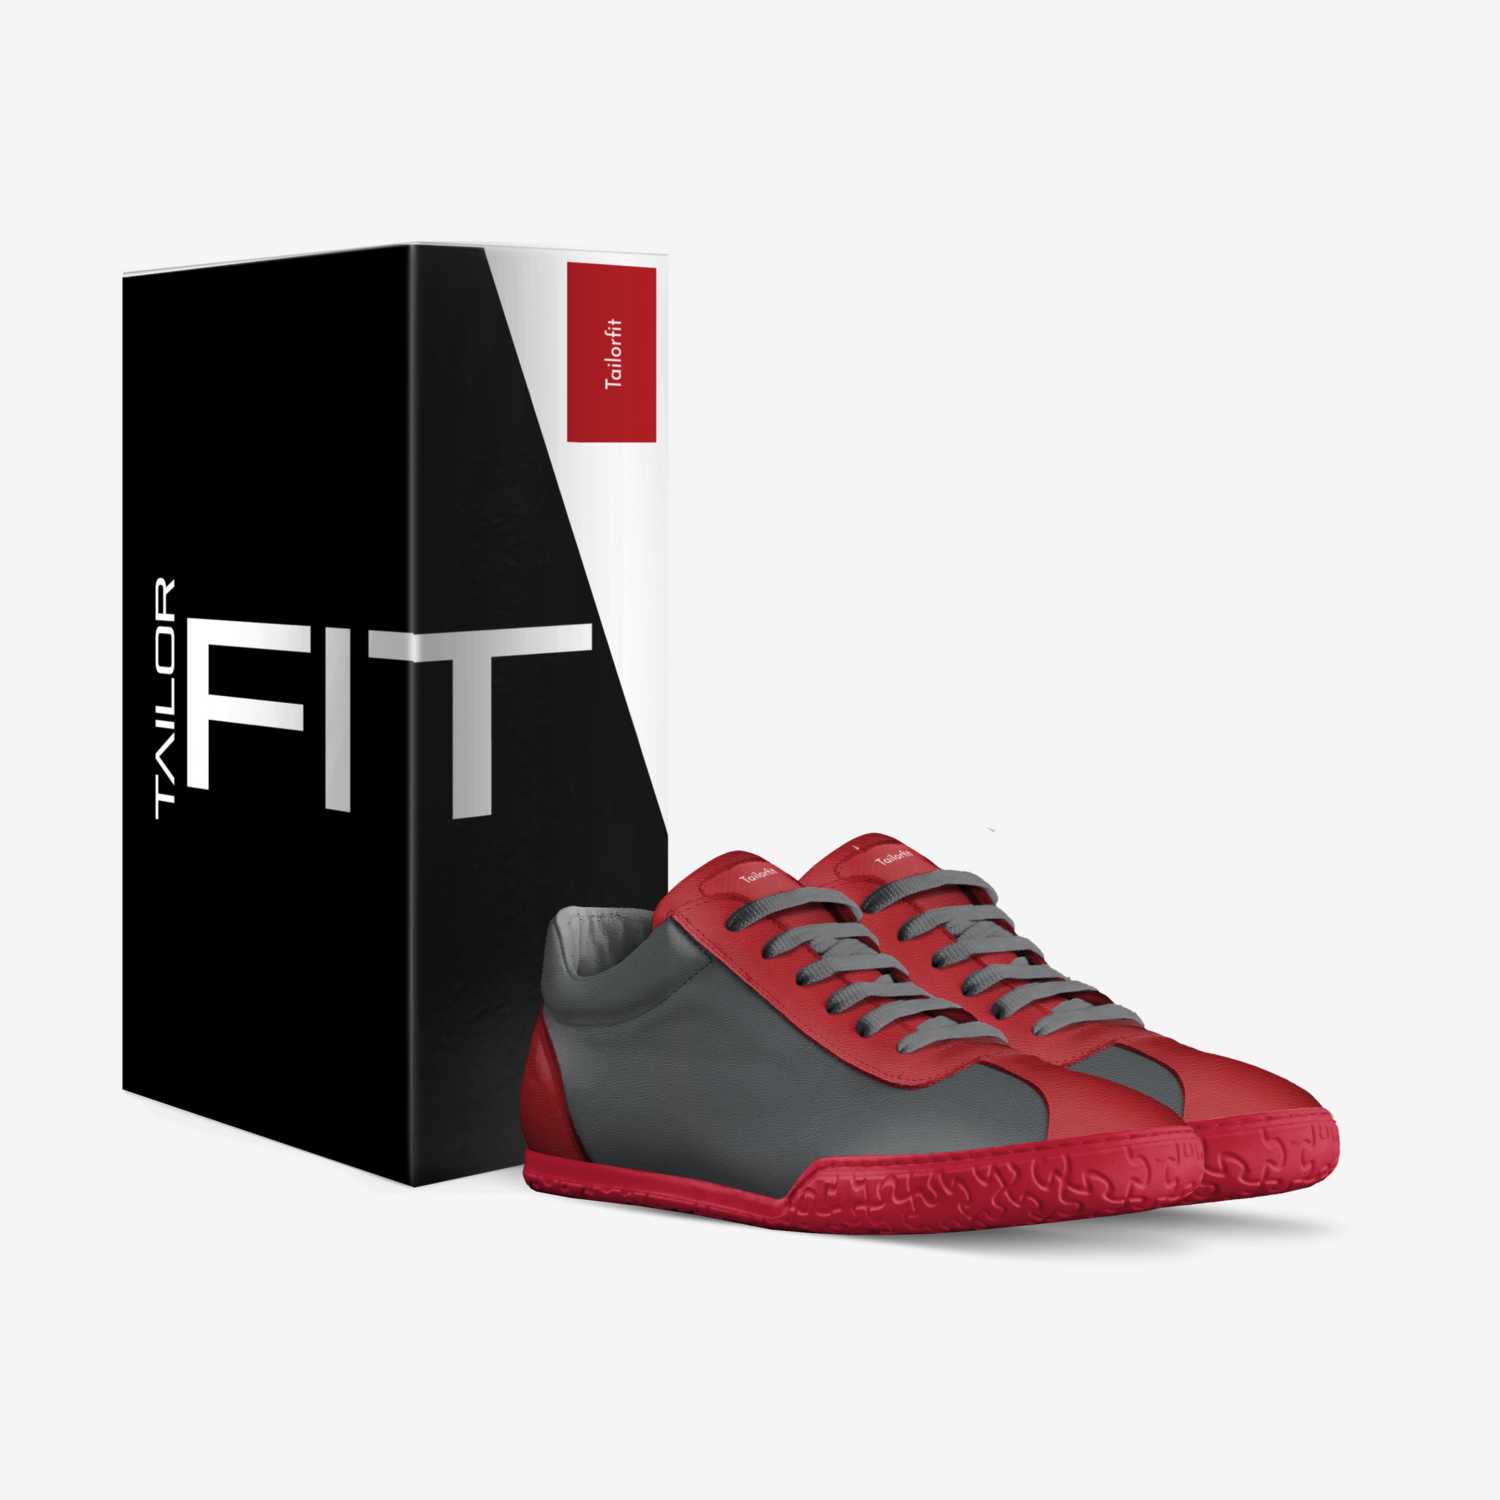 Tailorfit custom made in Italy shoes by Talor Fiit | Box view